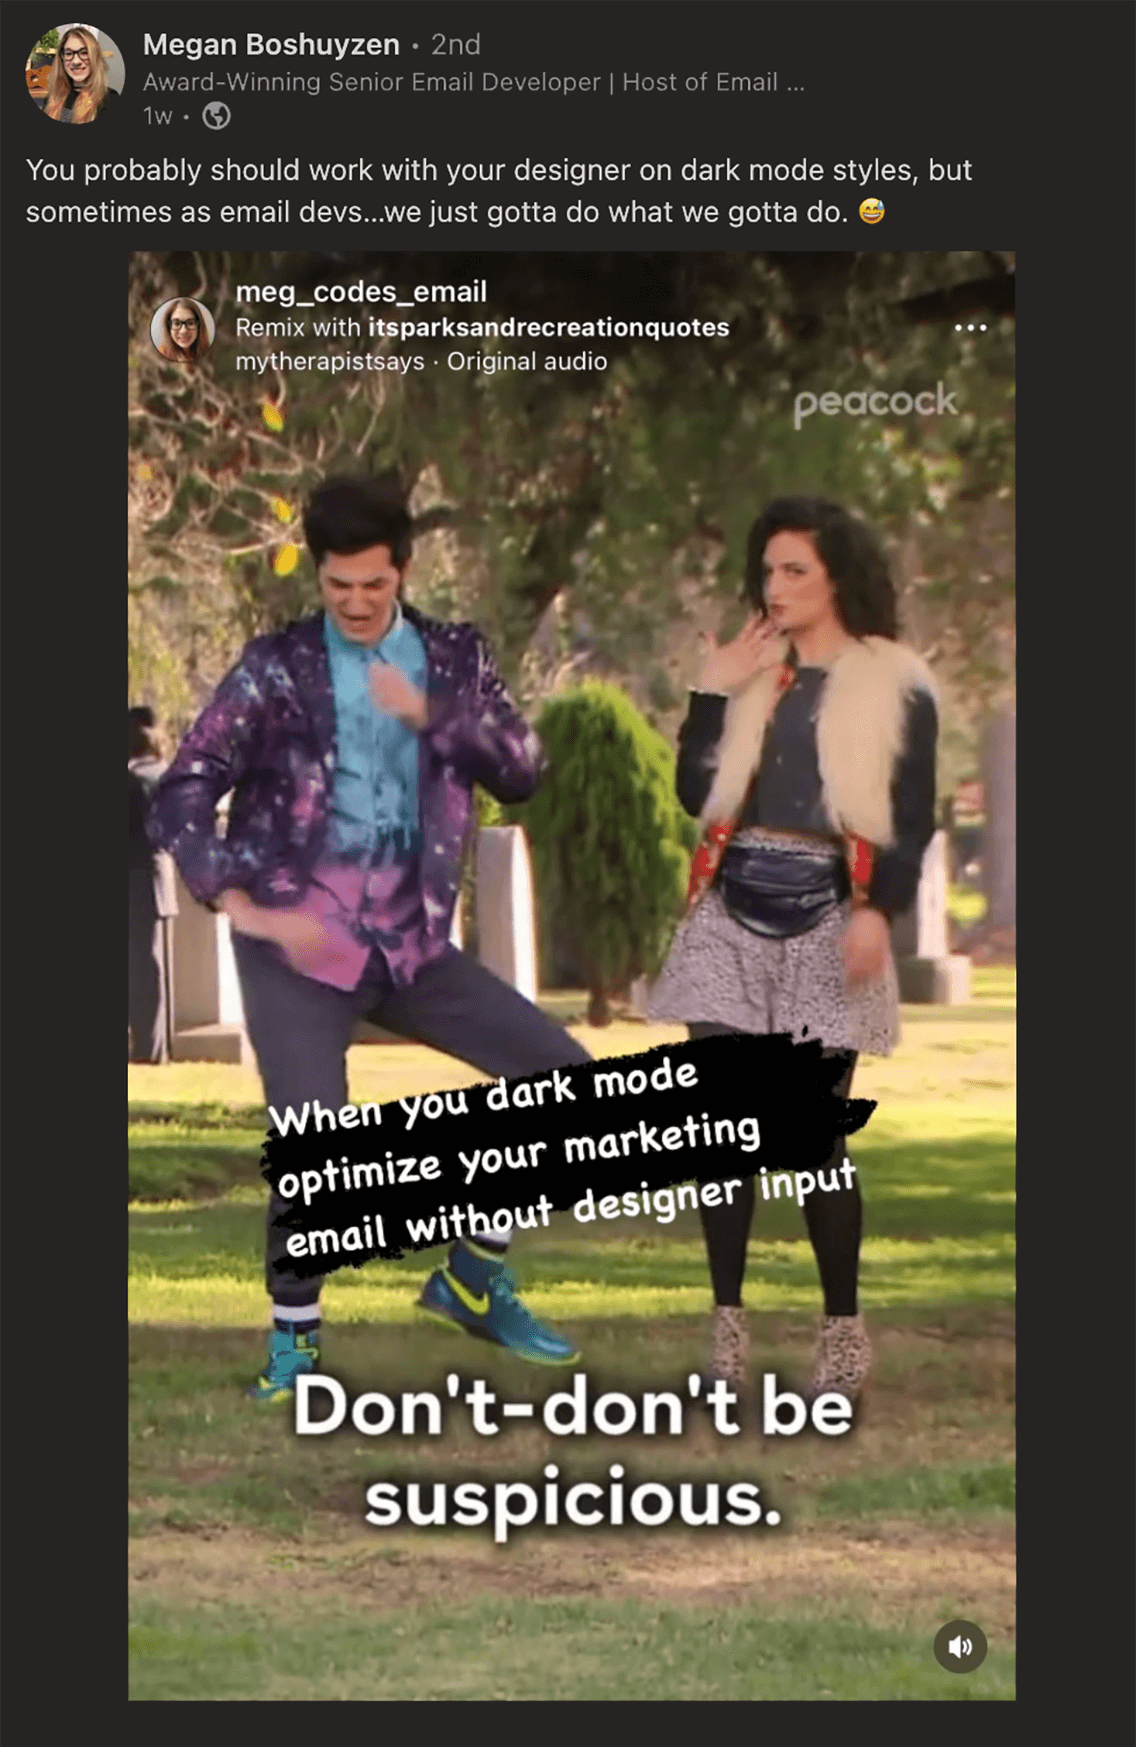 Megan Boshuyzen on LinkedIn says 'you probably should work with your designer on dark mode styles, but sometimes as email devs... we just gotta do what we gotta do' with a meme of Jean-Ralphio and Mona-Lisa Saperstein from Parks and Rec singing 'Don't-don't be suspicious'